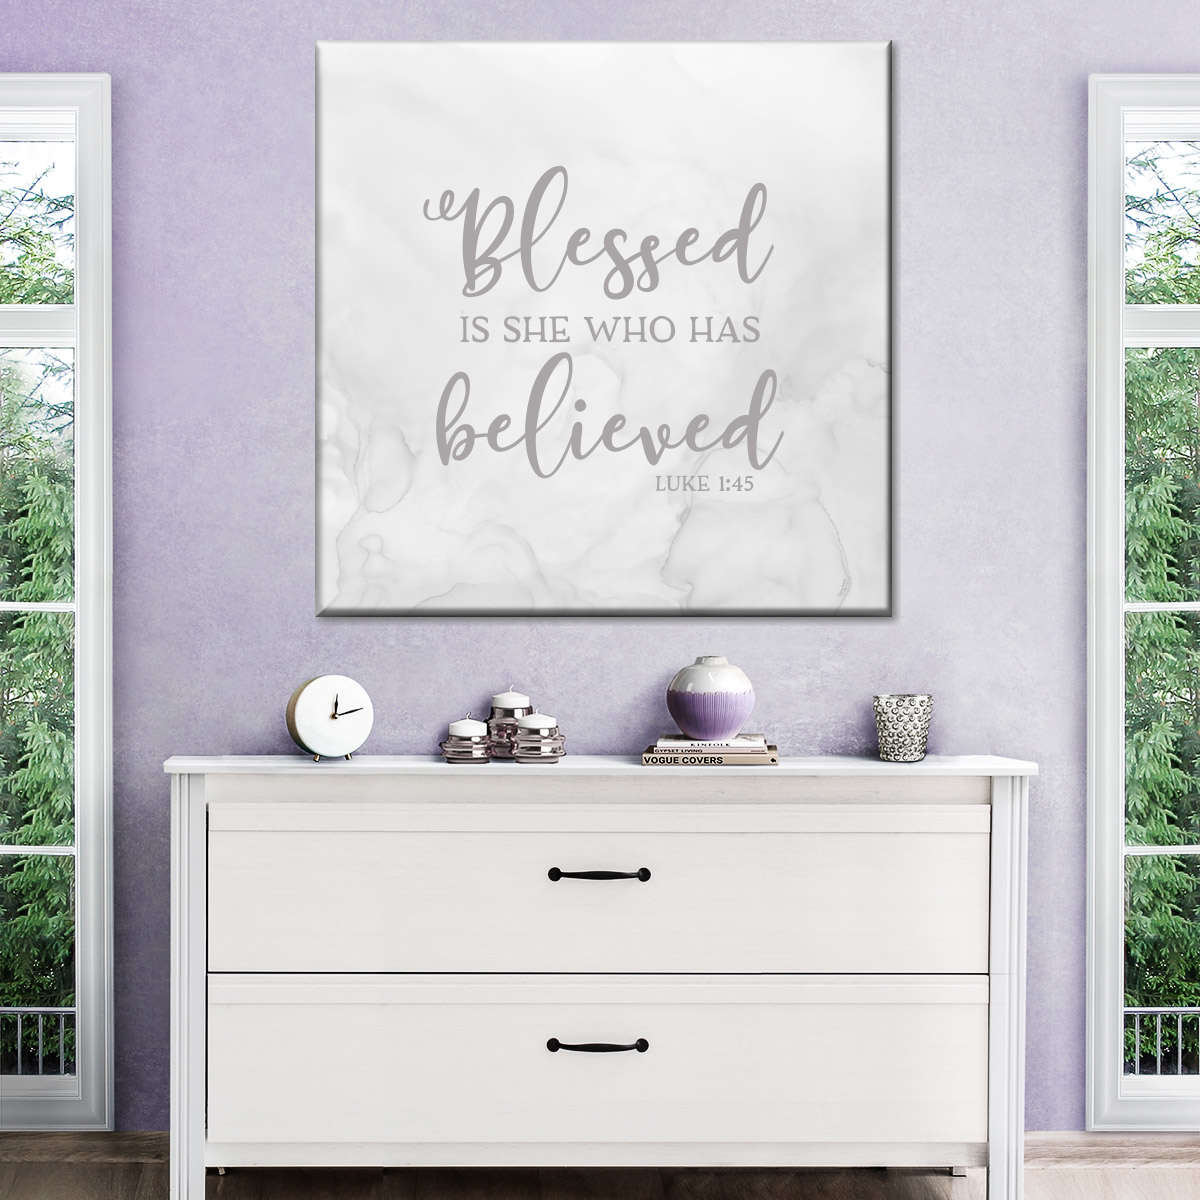 Girl Inspired Blessed Square Canvas Wall Art - Bible Verse Wall Art Canvas - Religious Wall Hanging